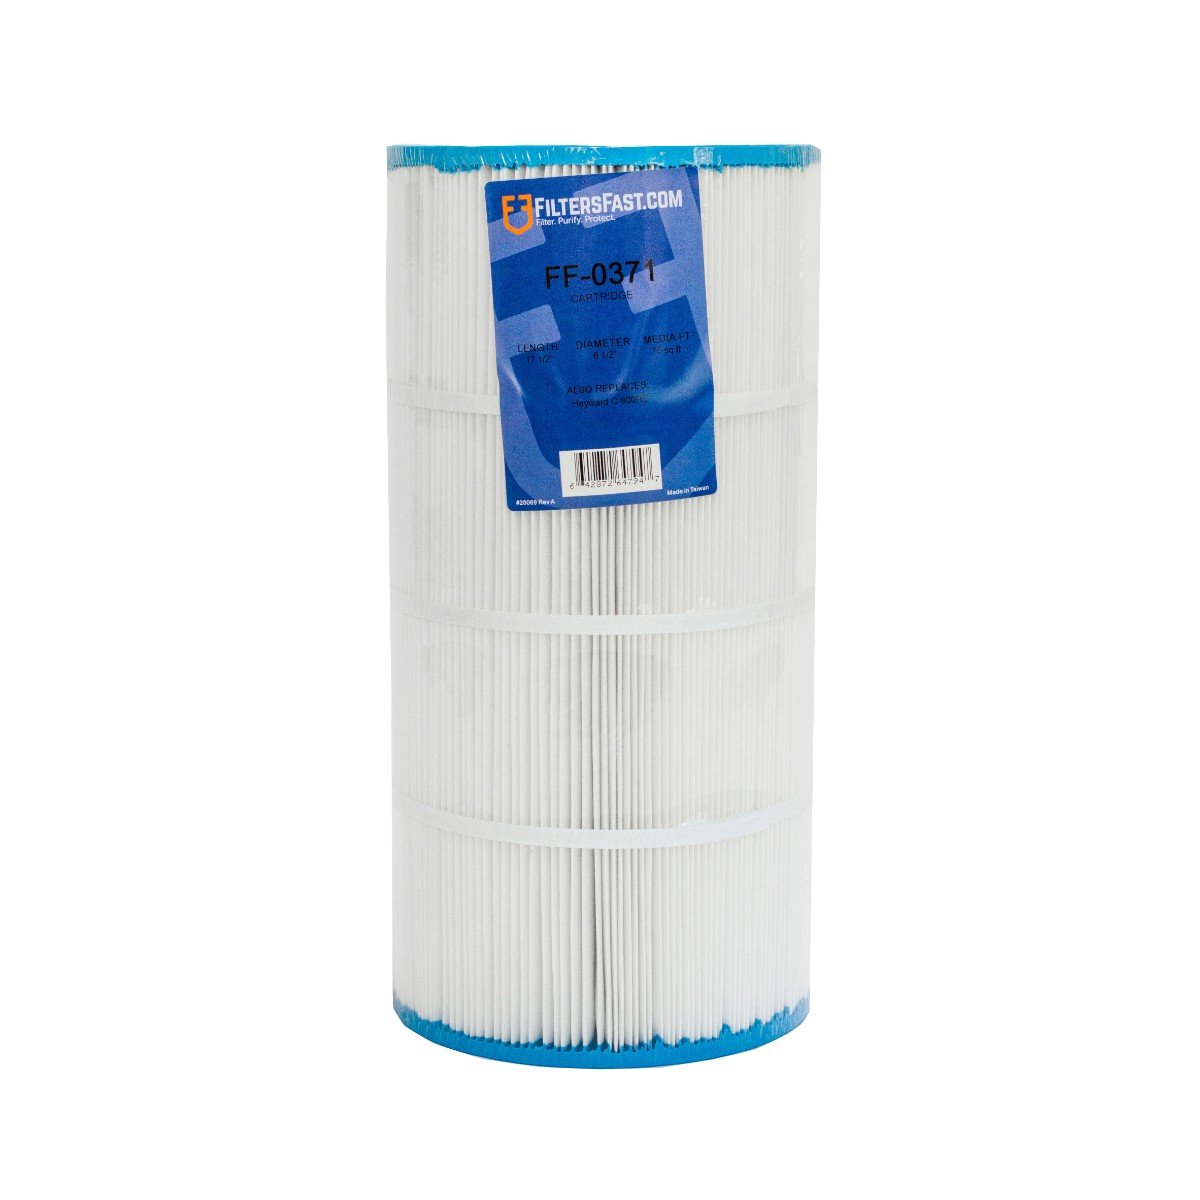 Filters Fast&reg; FF-0371 Replacement Pool & Spa Filter Cartridge